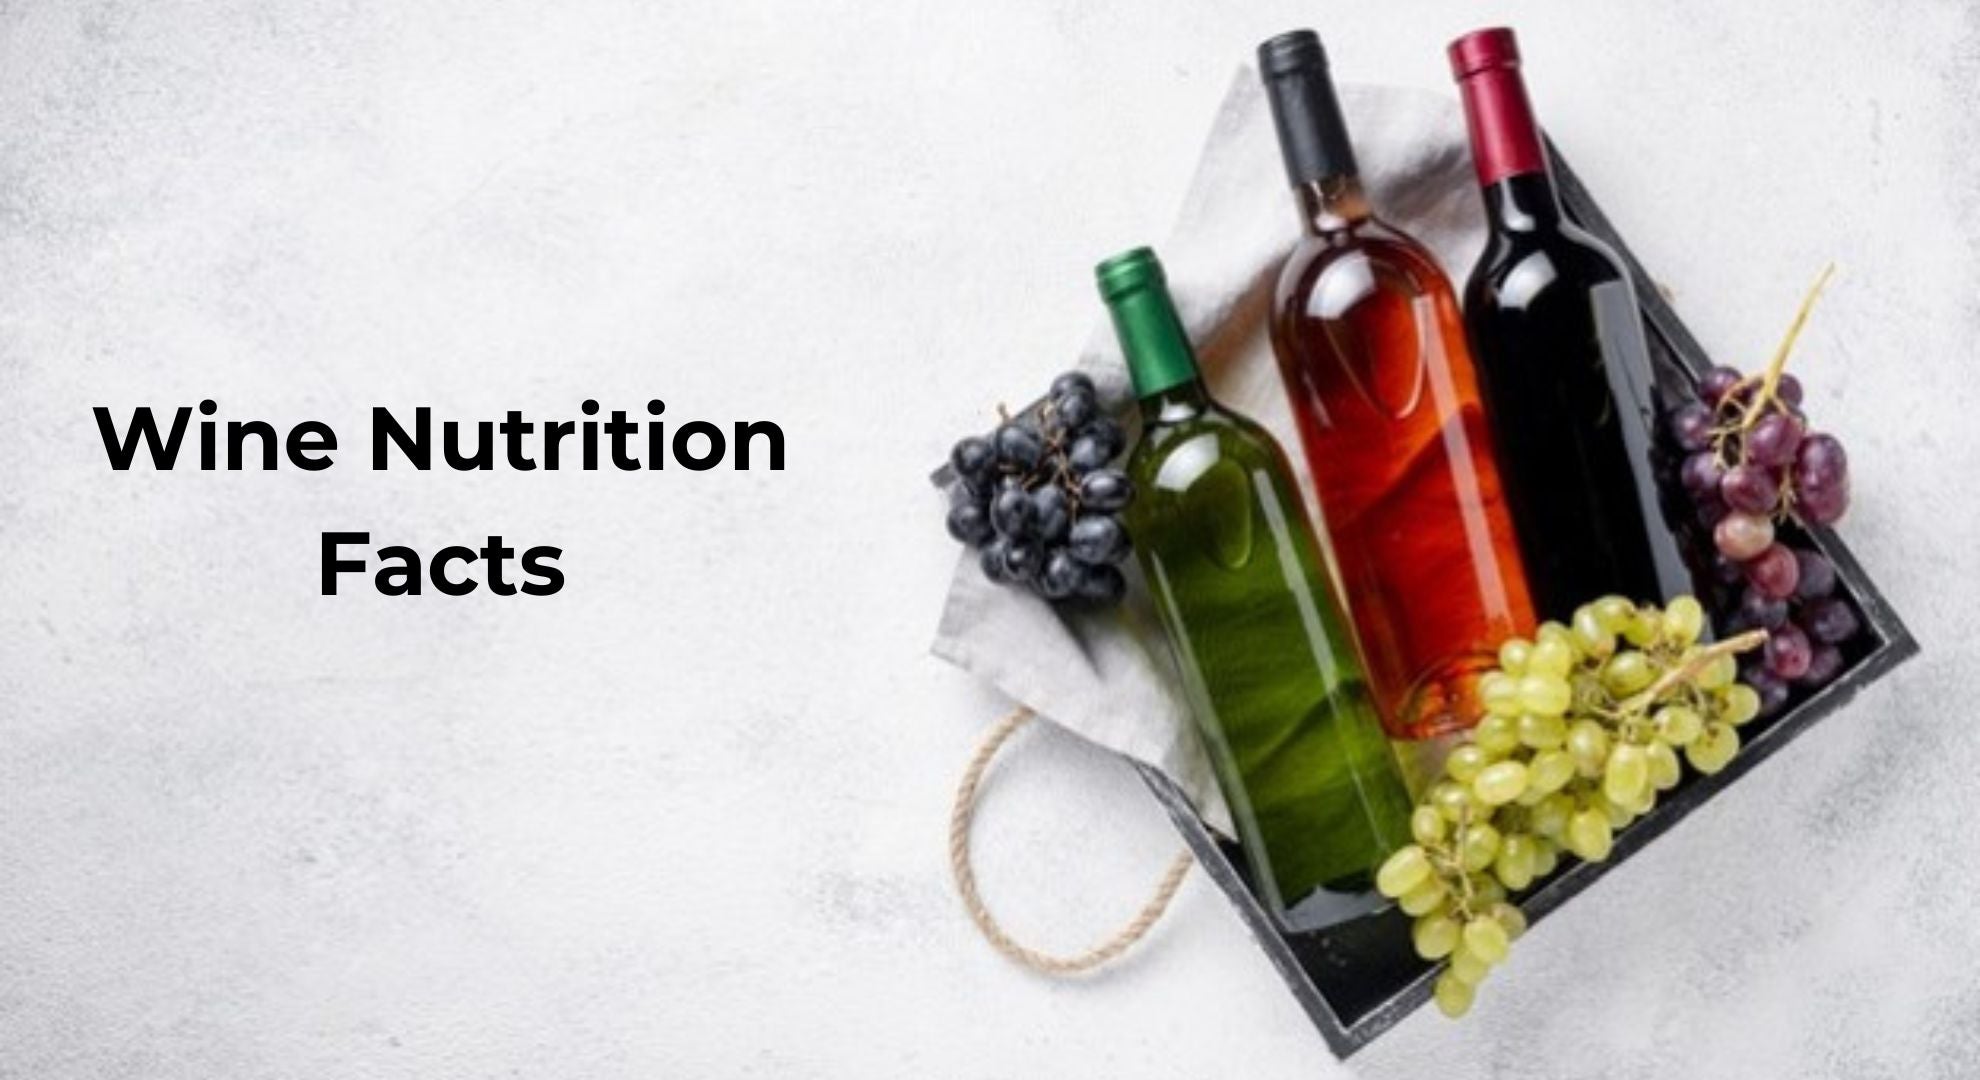 How to Understand Wine Nutrition Facts